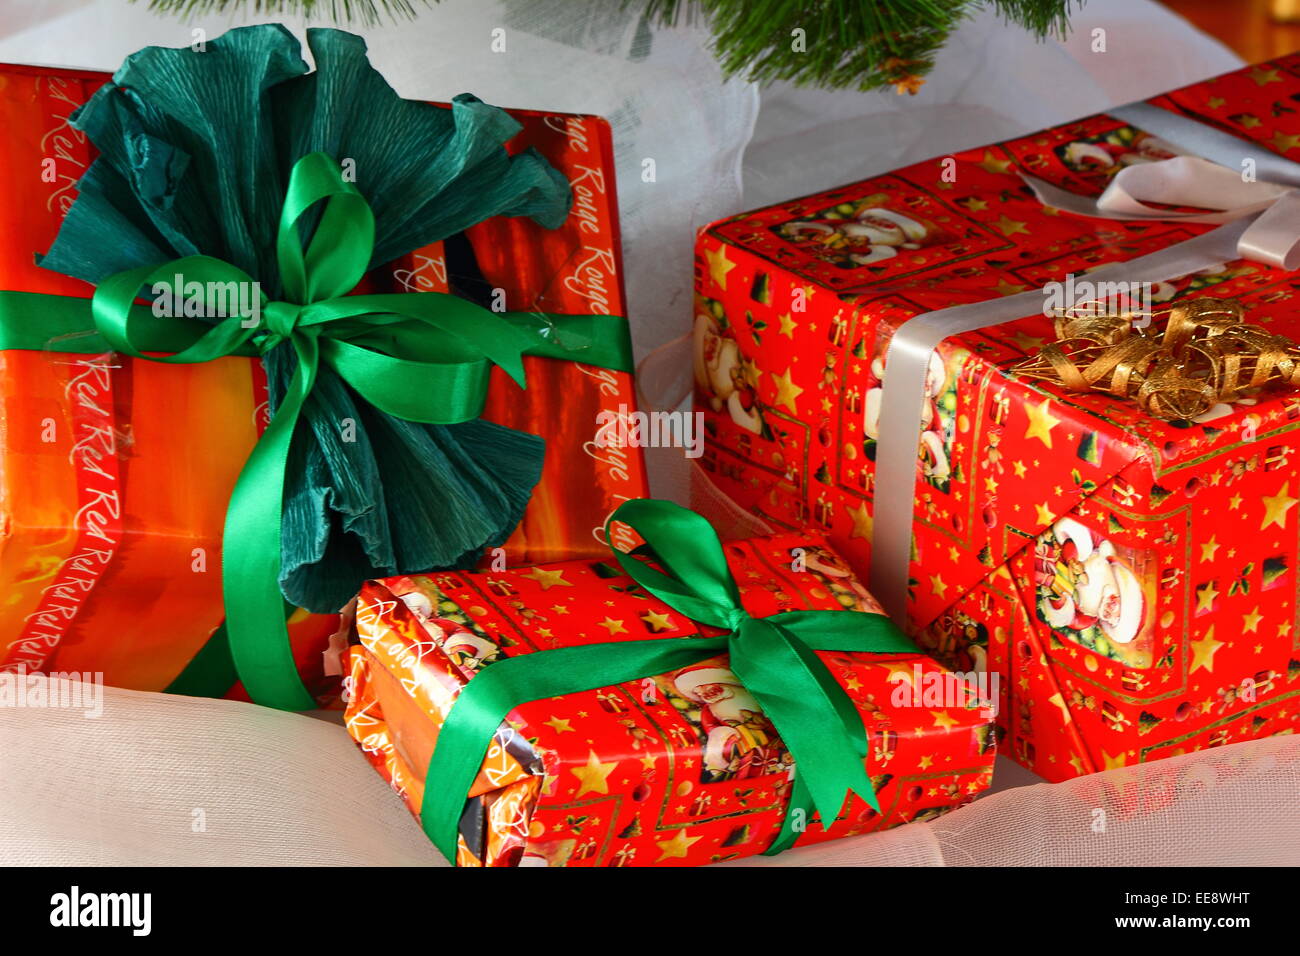 Christmas gifts are in boxes under the Christmas tree Stock Photo